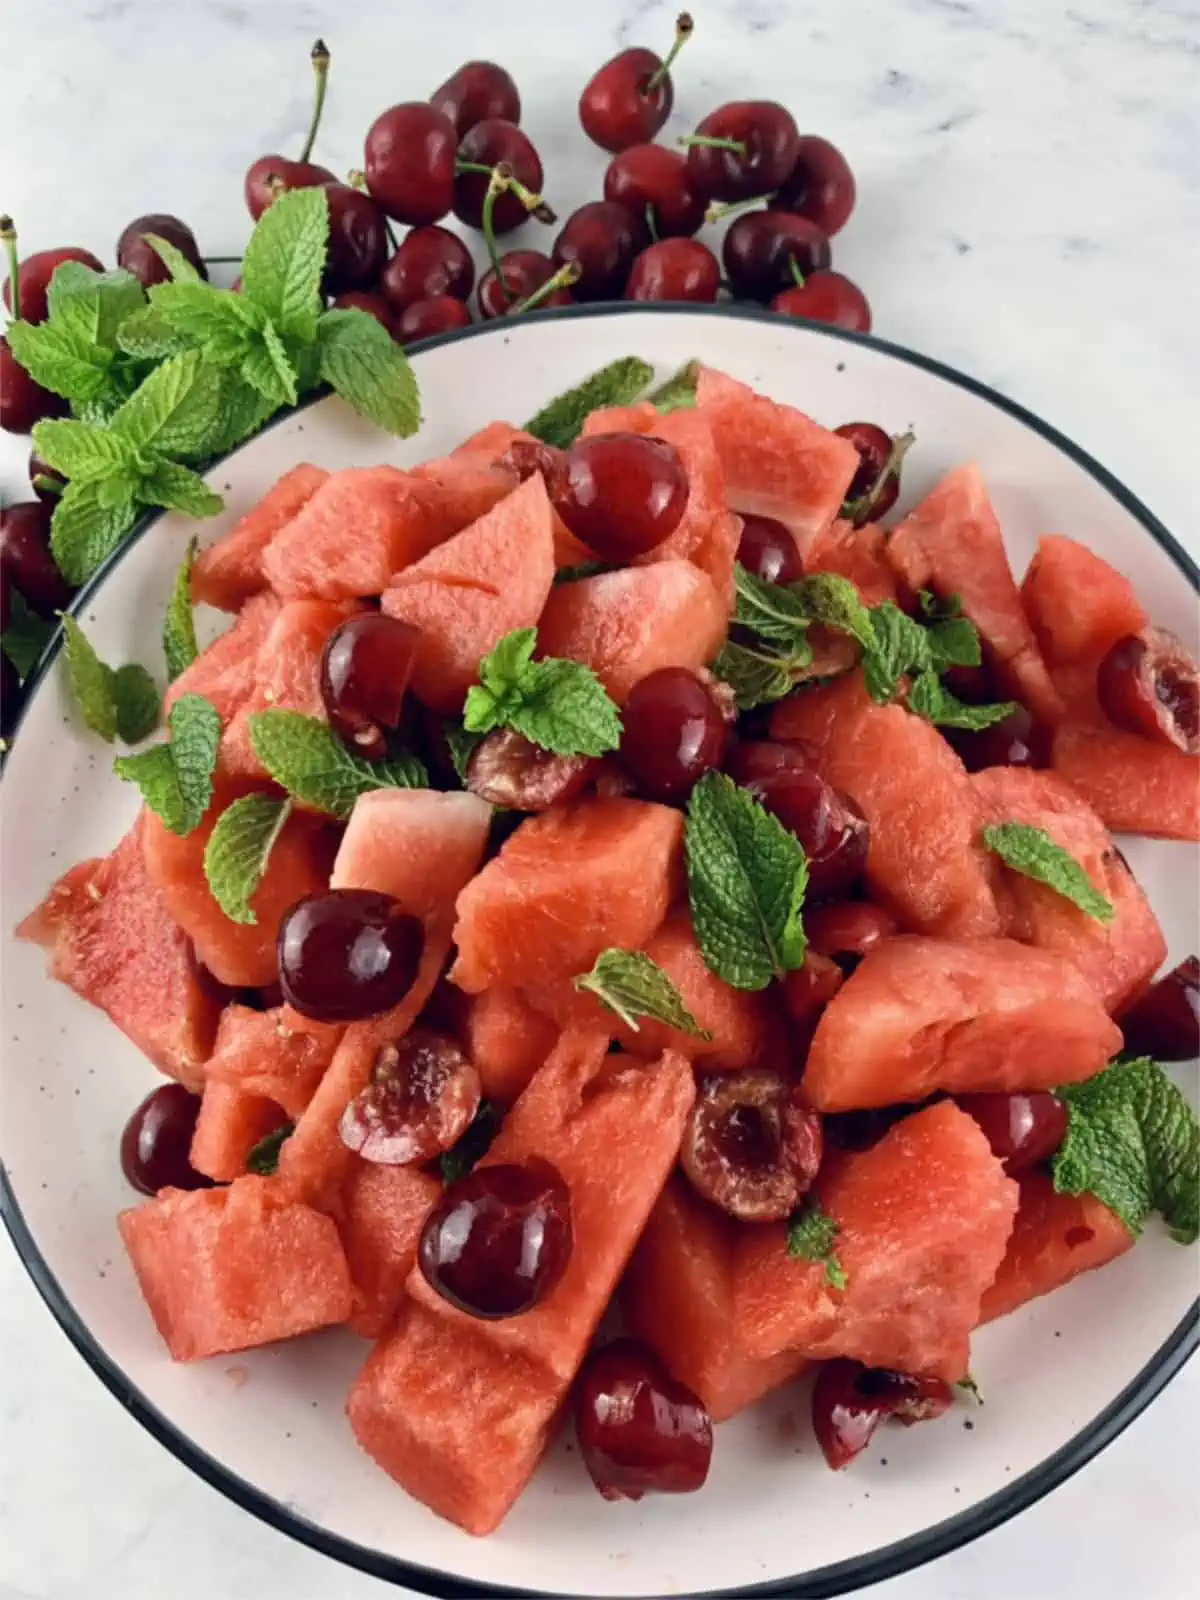 Watermelon fruit salad on a platter with cherries and mint on the side.